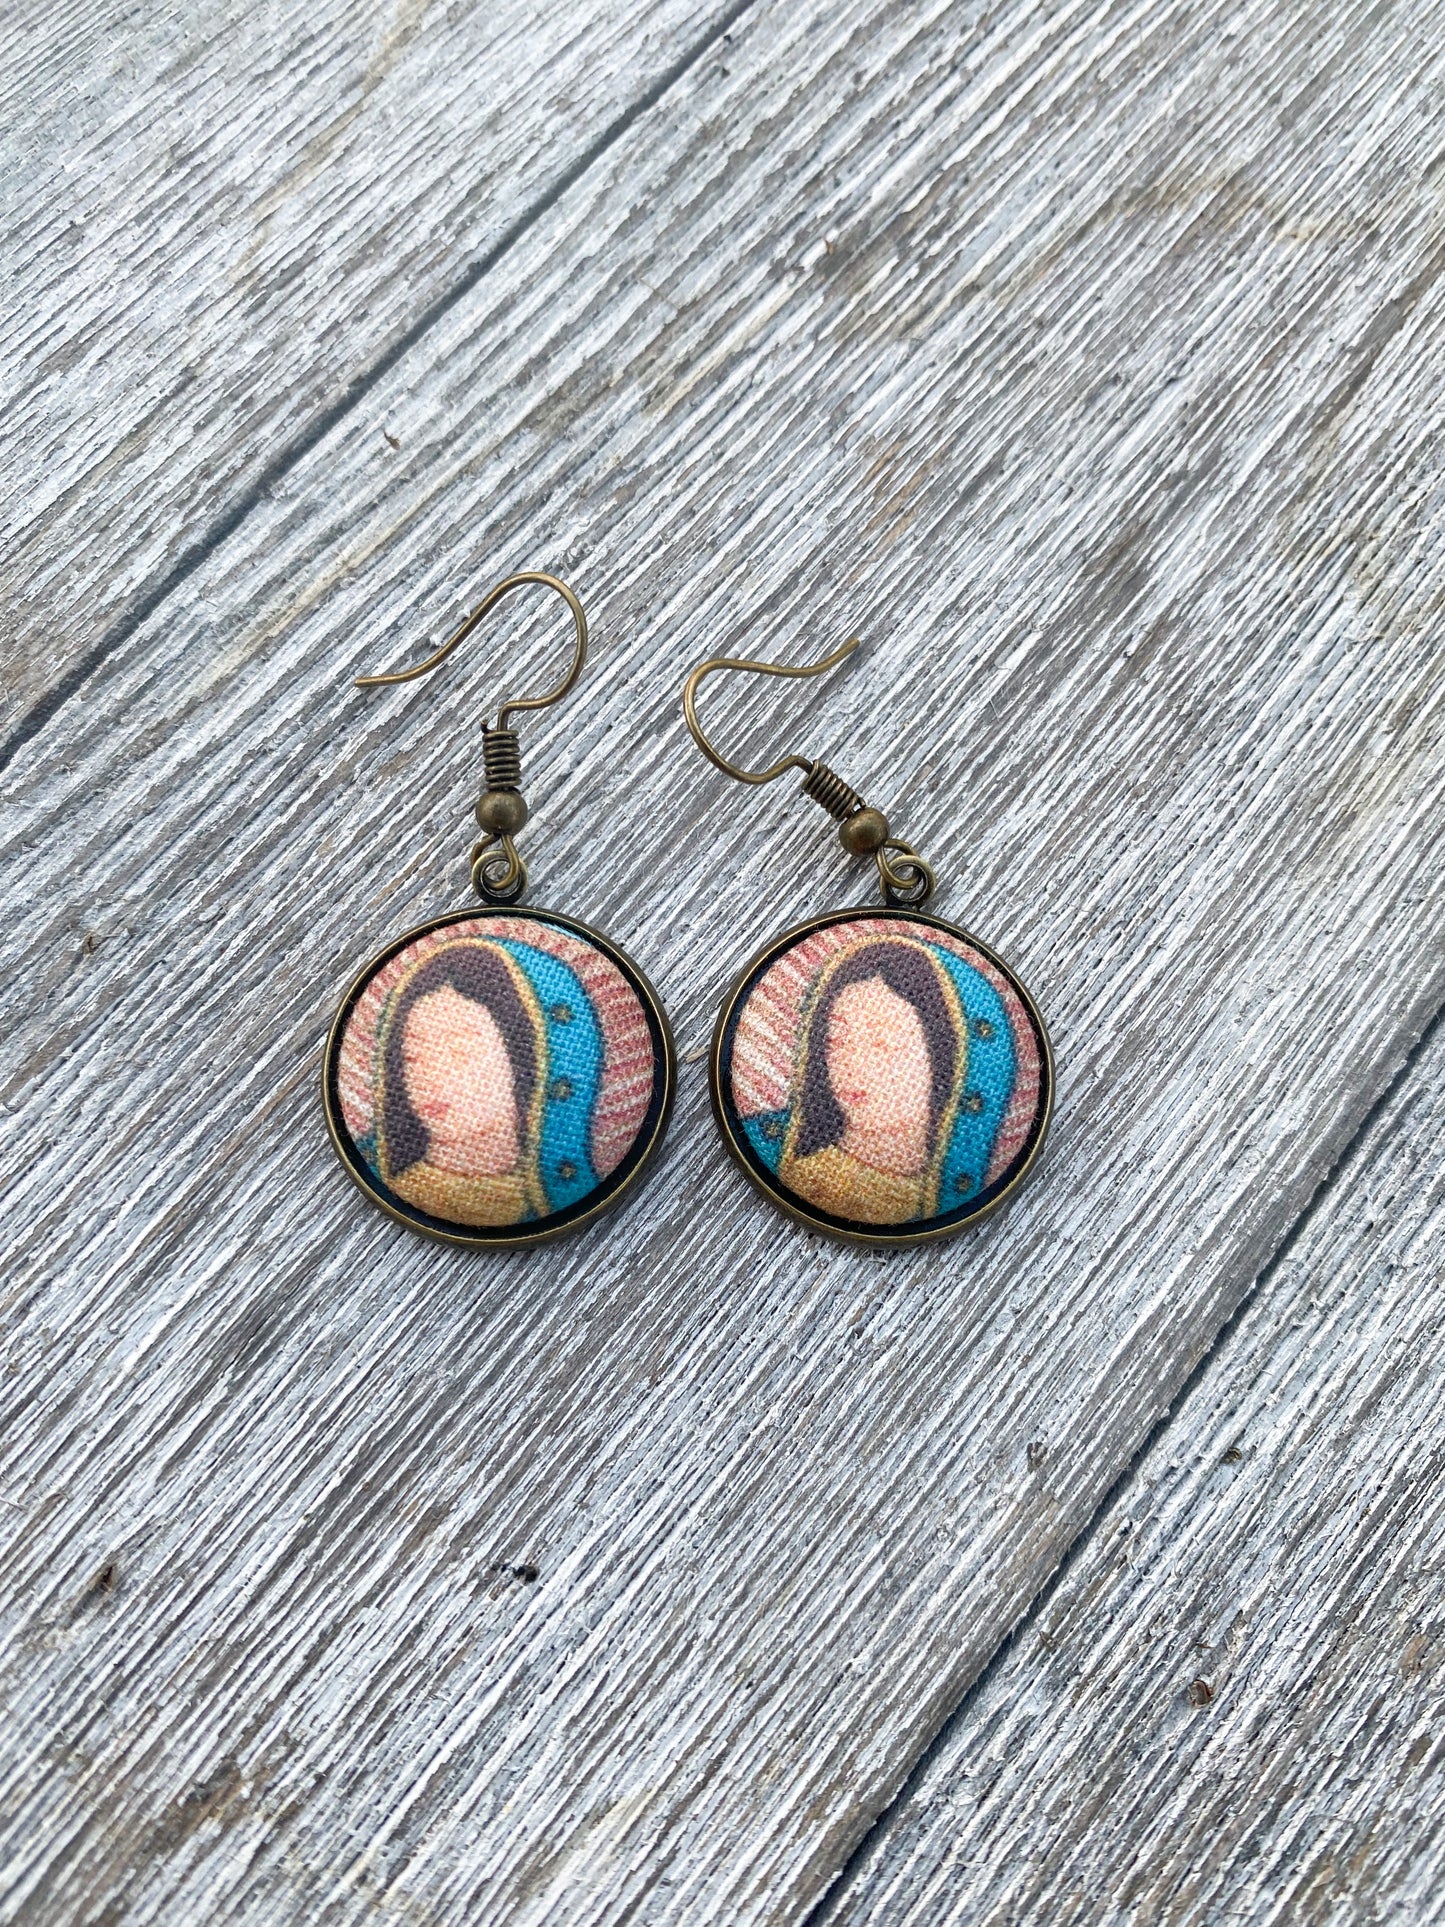 Lady Guadalupe Virgin Mary Earrings Gift 